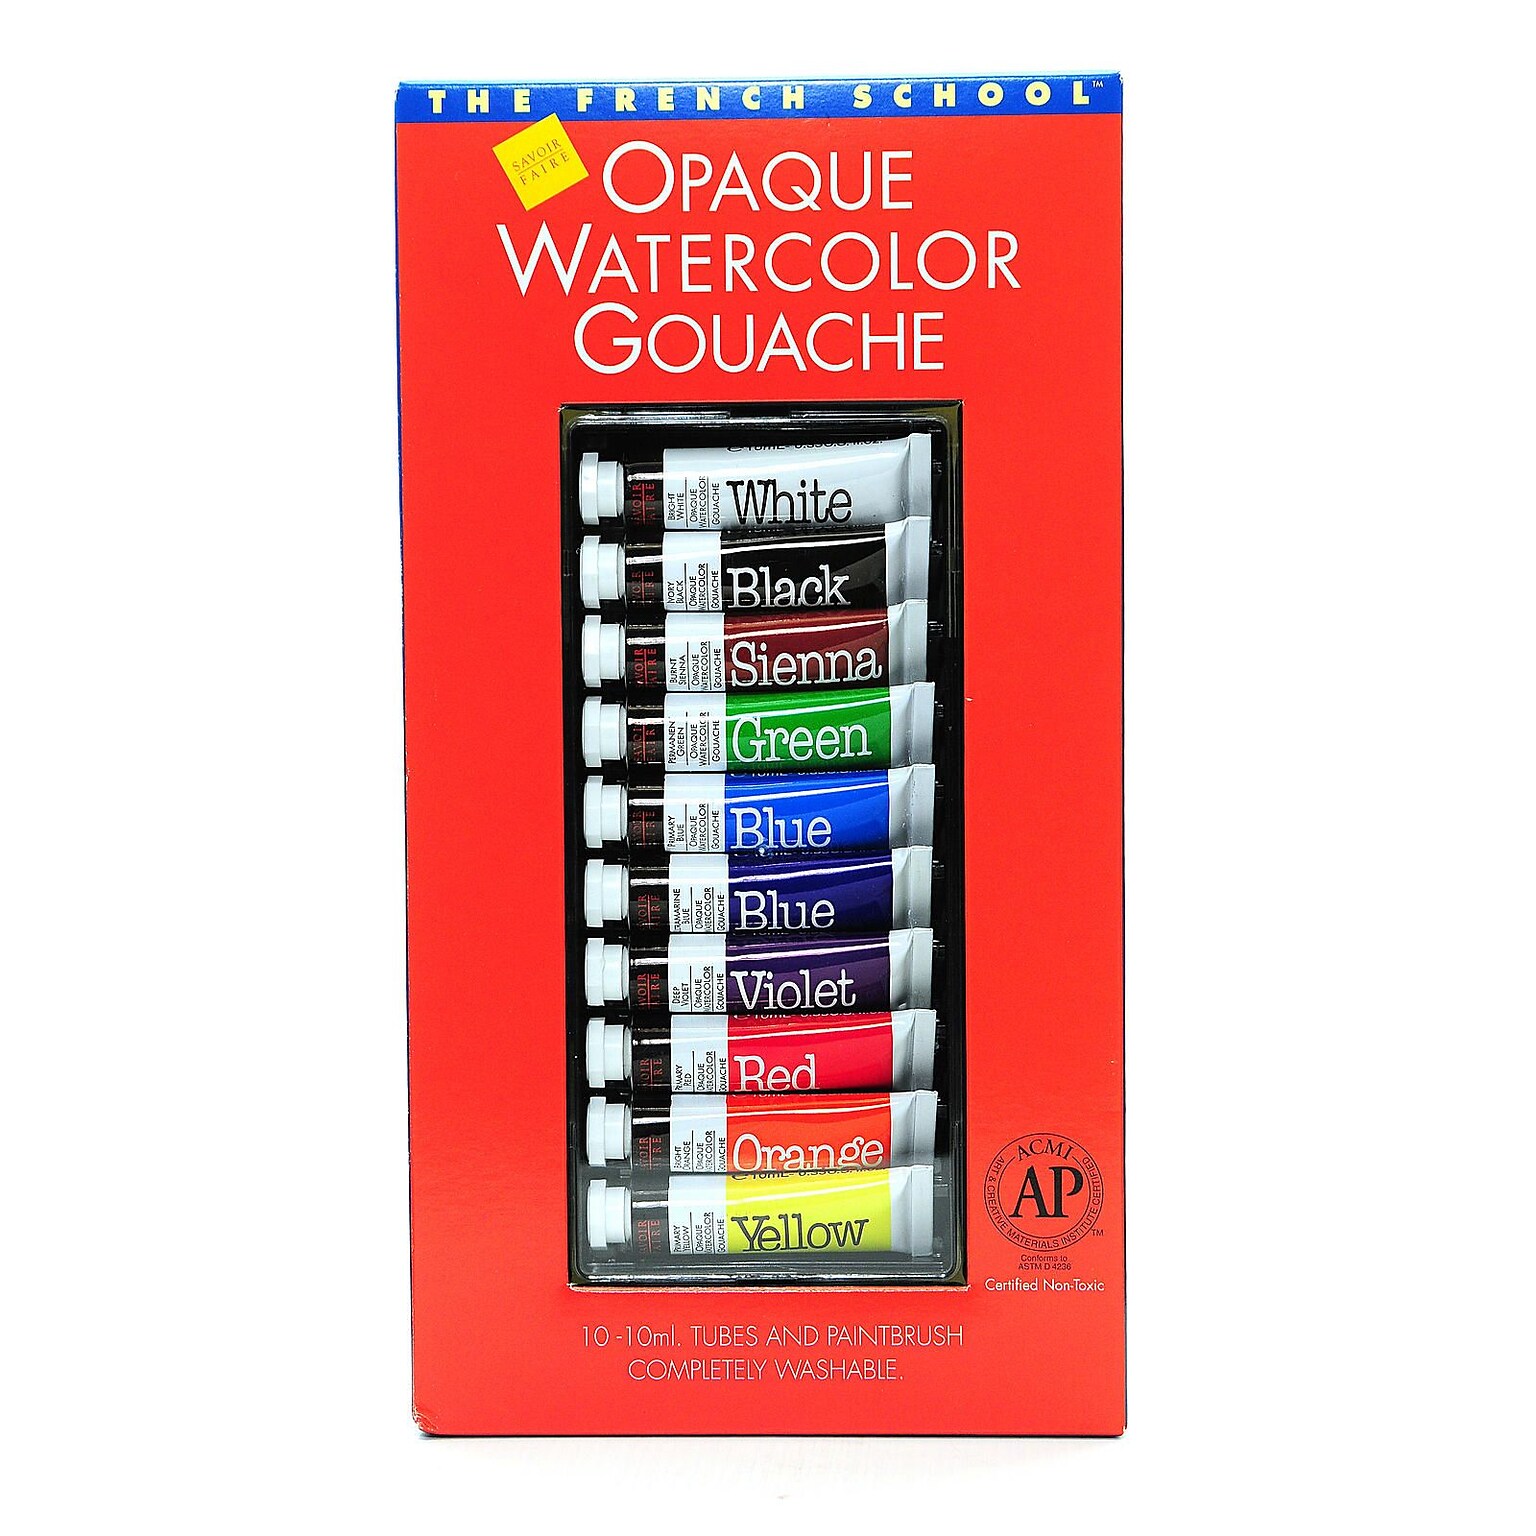 Savoir-Faire The French School Opaque Watercolor Gouache Tube Sets Set Of 10 In Case With Brush (31305)